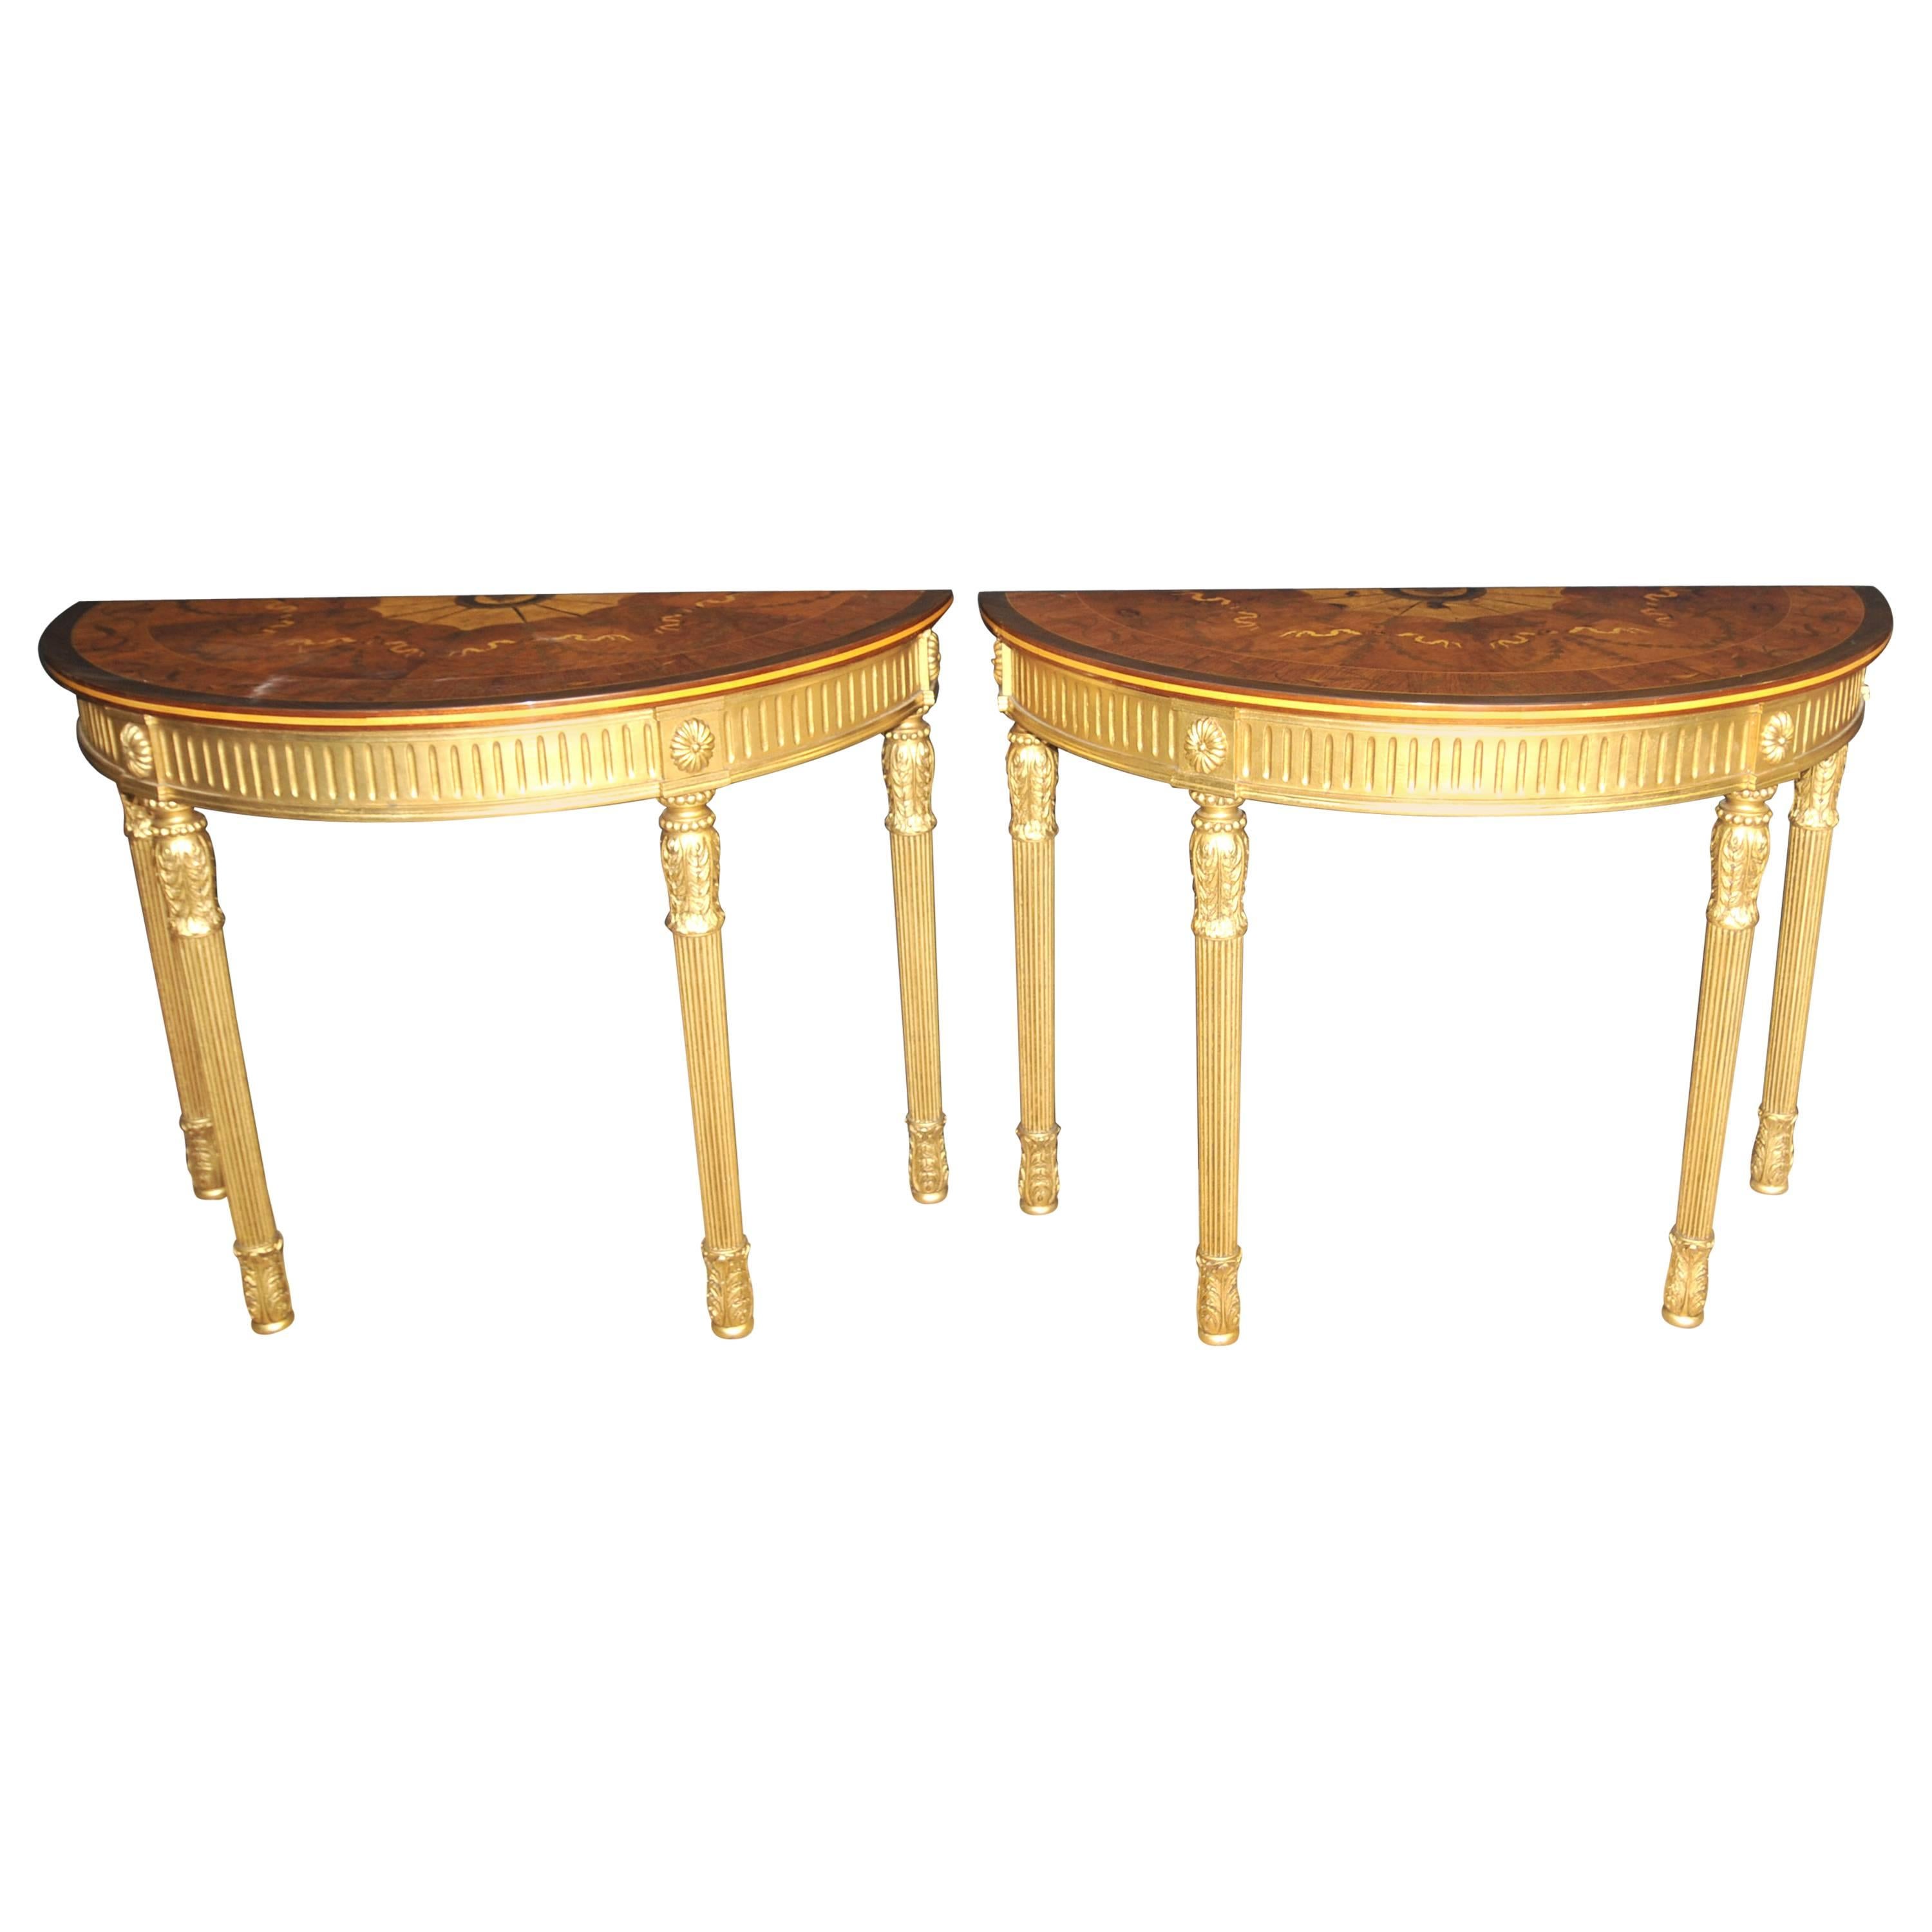 Pair of Adams Regency Style Console Tables Demilune Marquetry Inlay Tops For Sale